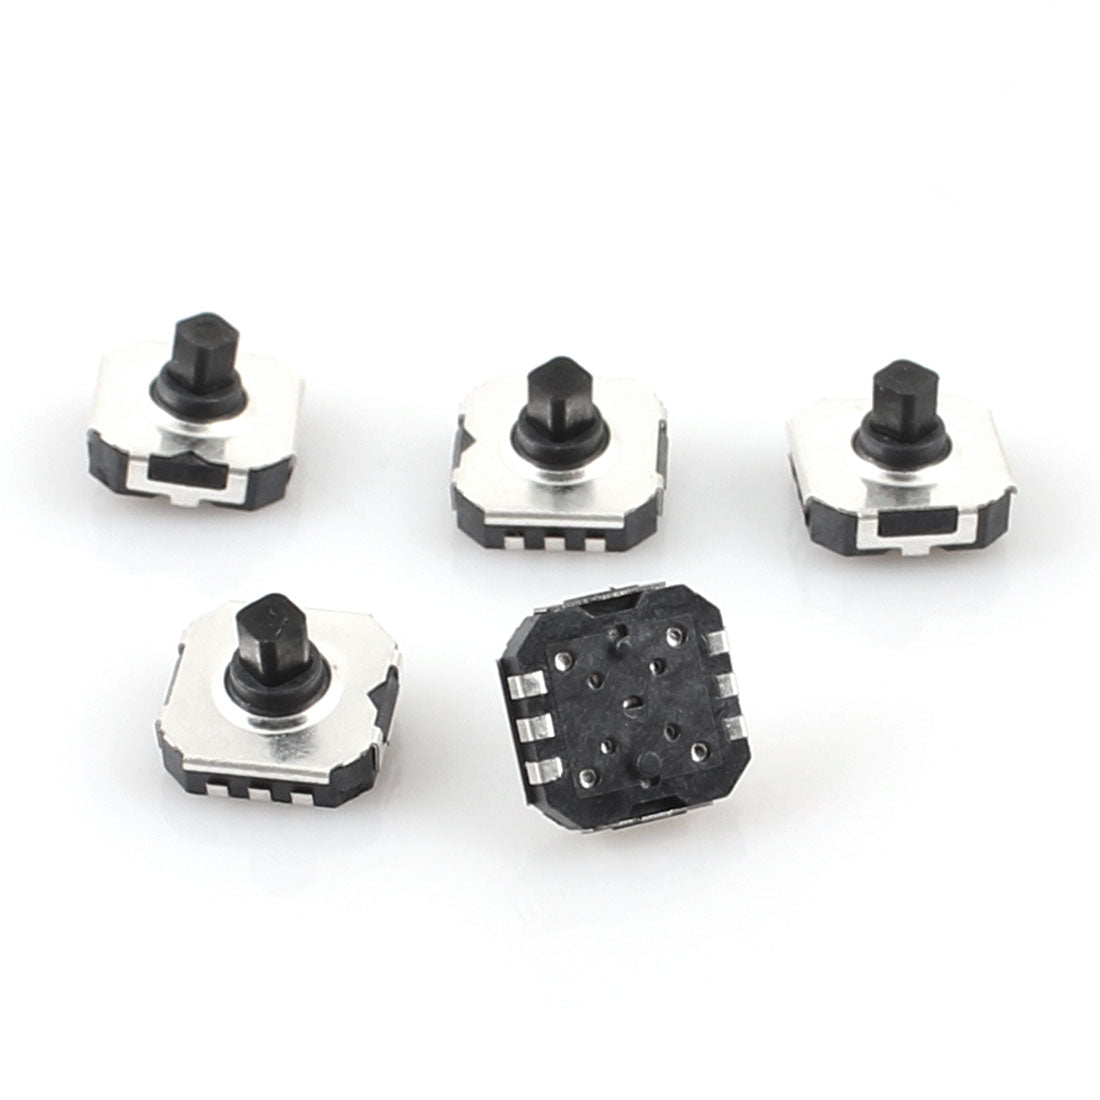 uxcell Uxcell 5 Pcs 7mm x 7mm 6 Pin 5 Way Momentary Push Button Surface Mounted Devices SMT Tactile Switch